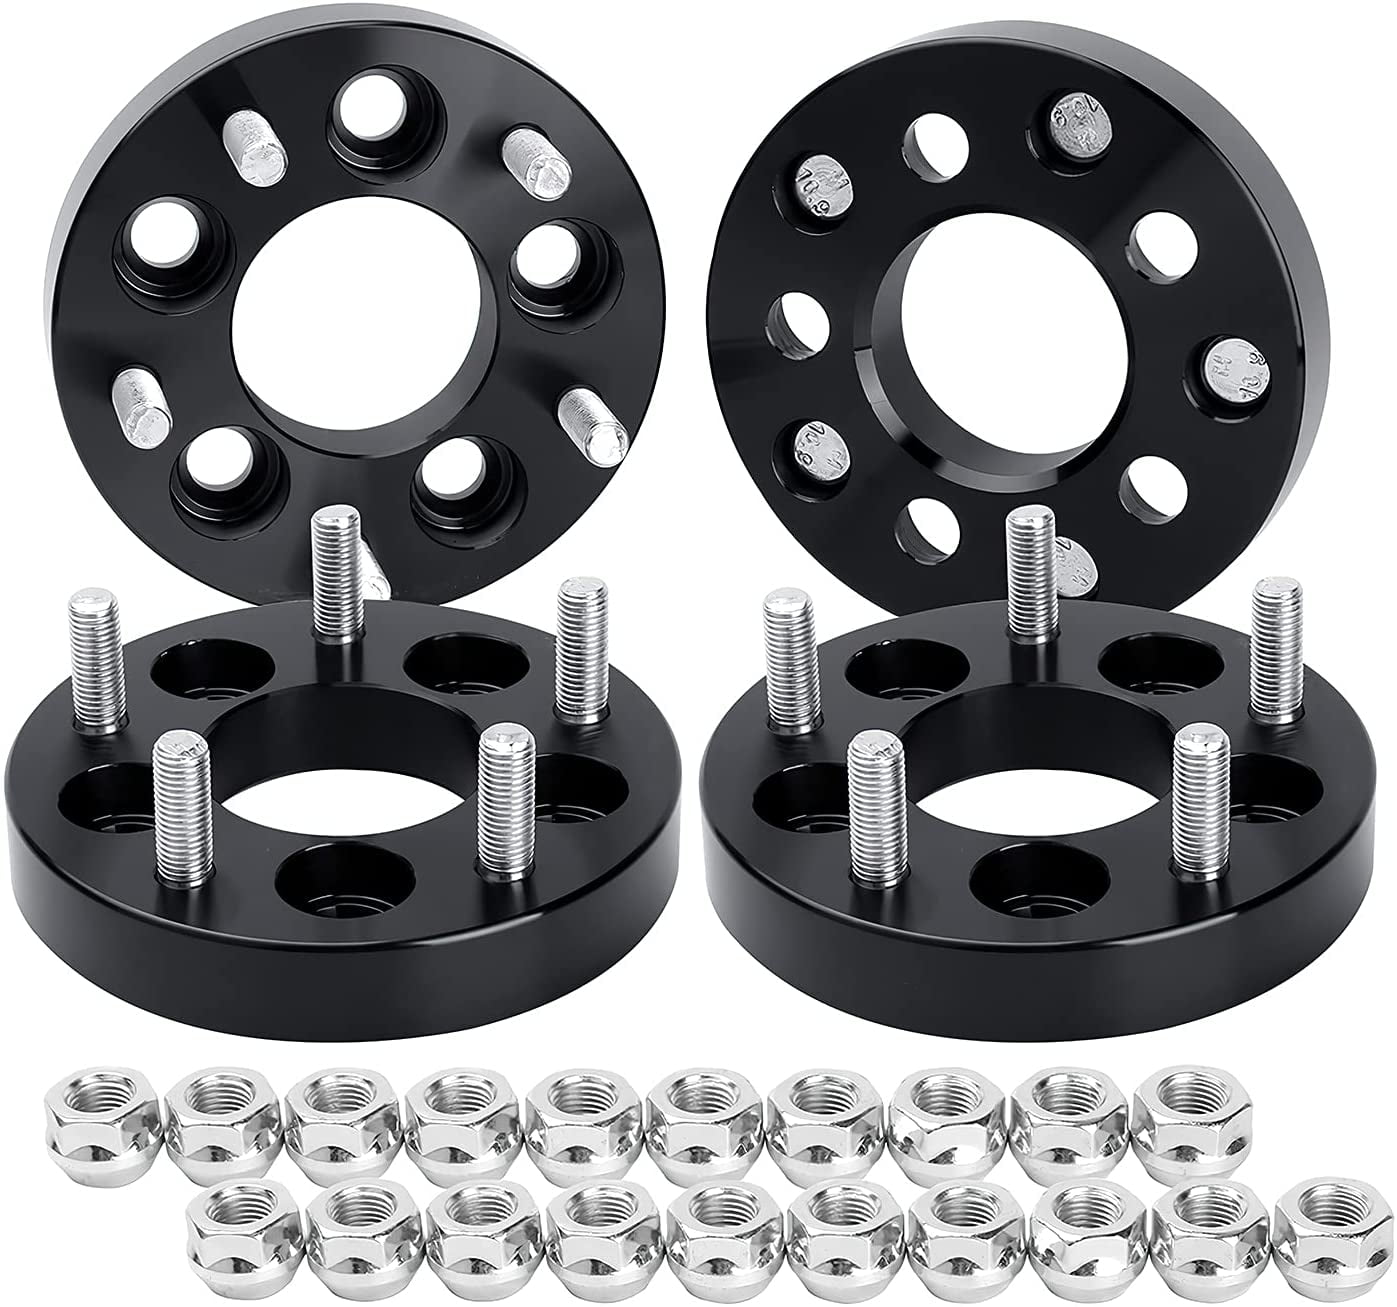 LAND CRUISER Wheel Spacers Adapters 2 inch fits ALL 6 lug Toyota FJ SEQUOIA 